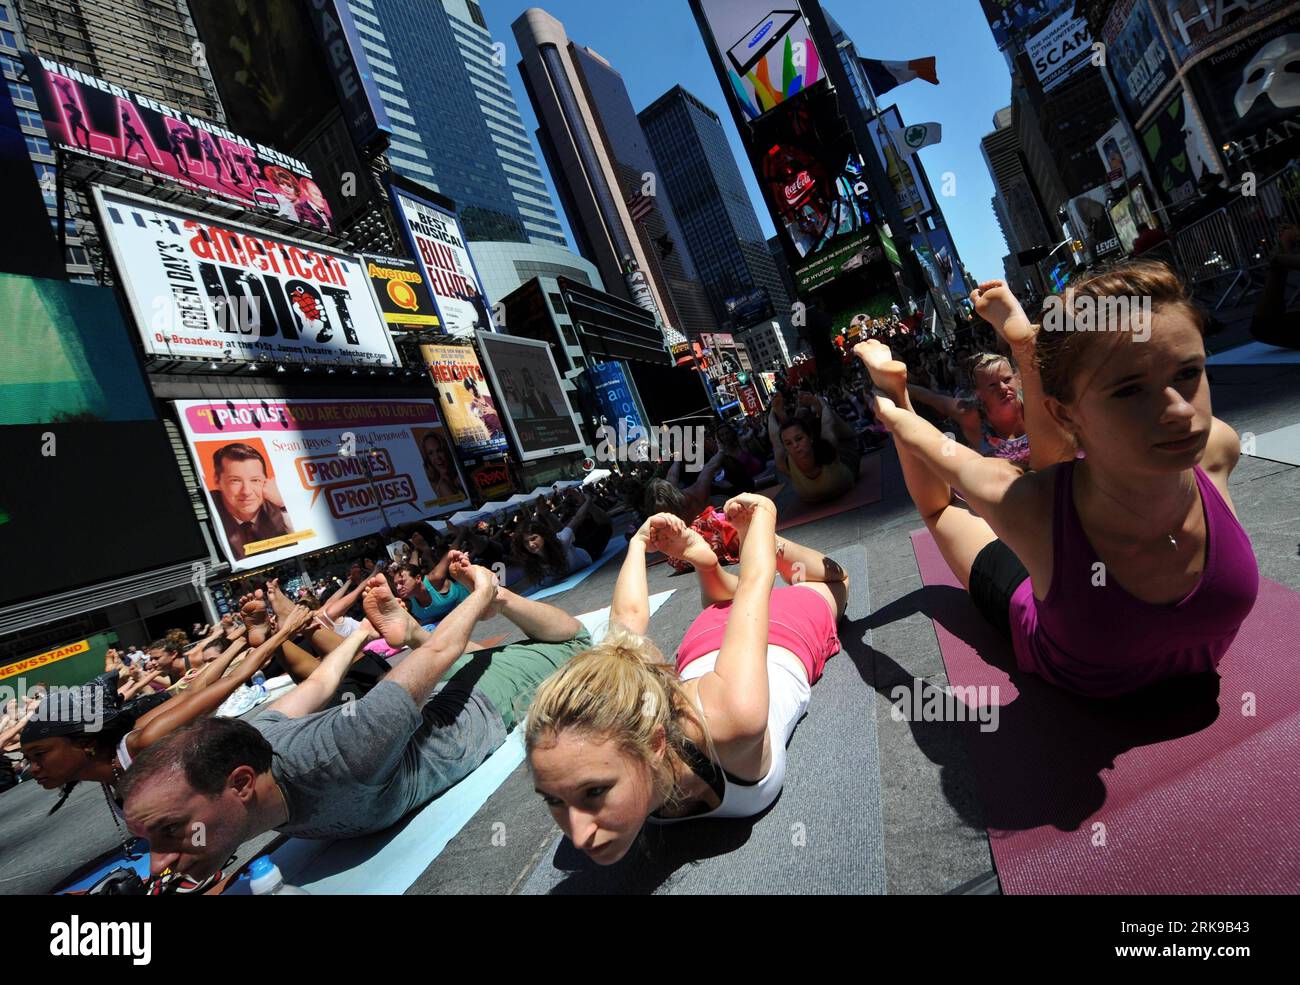 Bildnummer: 54158706  Datum: 21.06.2010  Copyright: imago/Xinhua (100621) -- NEW YORK, June 21, 2010 (Xinhua) -- Yoga enthusiasts practise yoga on the morning of the summer solstice at Times Square in New York, the United States, June 21, 2010. Thousands of yoga enthusiasts got together during the eighth annual Solstice in Times Square event to celebrate the longest day of the year. (Xinhua/Shen Hong) (zw) (19)U.S.-NEW YORK-TIMES SQUARE-YOGA PUBLICATIONxNOTxINxCHN Gesellschaft Freizeitsport Yoga Sommersonnenwende kurios premiumd xint kbdig xsp 2010 quer  o0 Sonnenwende, Sonnwendfeier    Bildnu Stock Photo